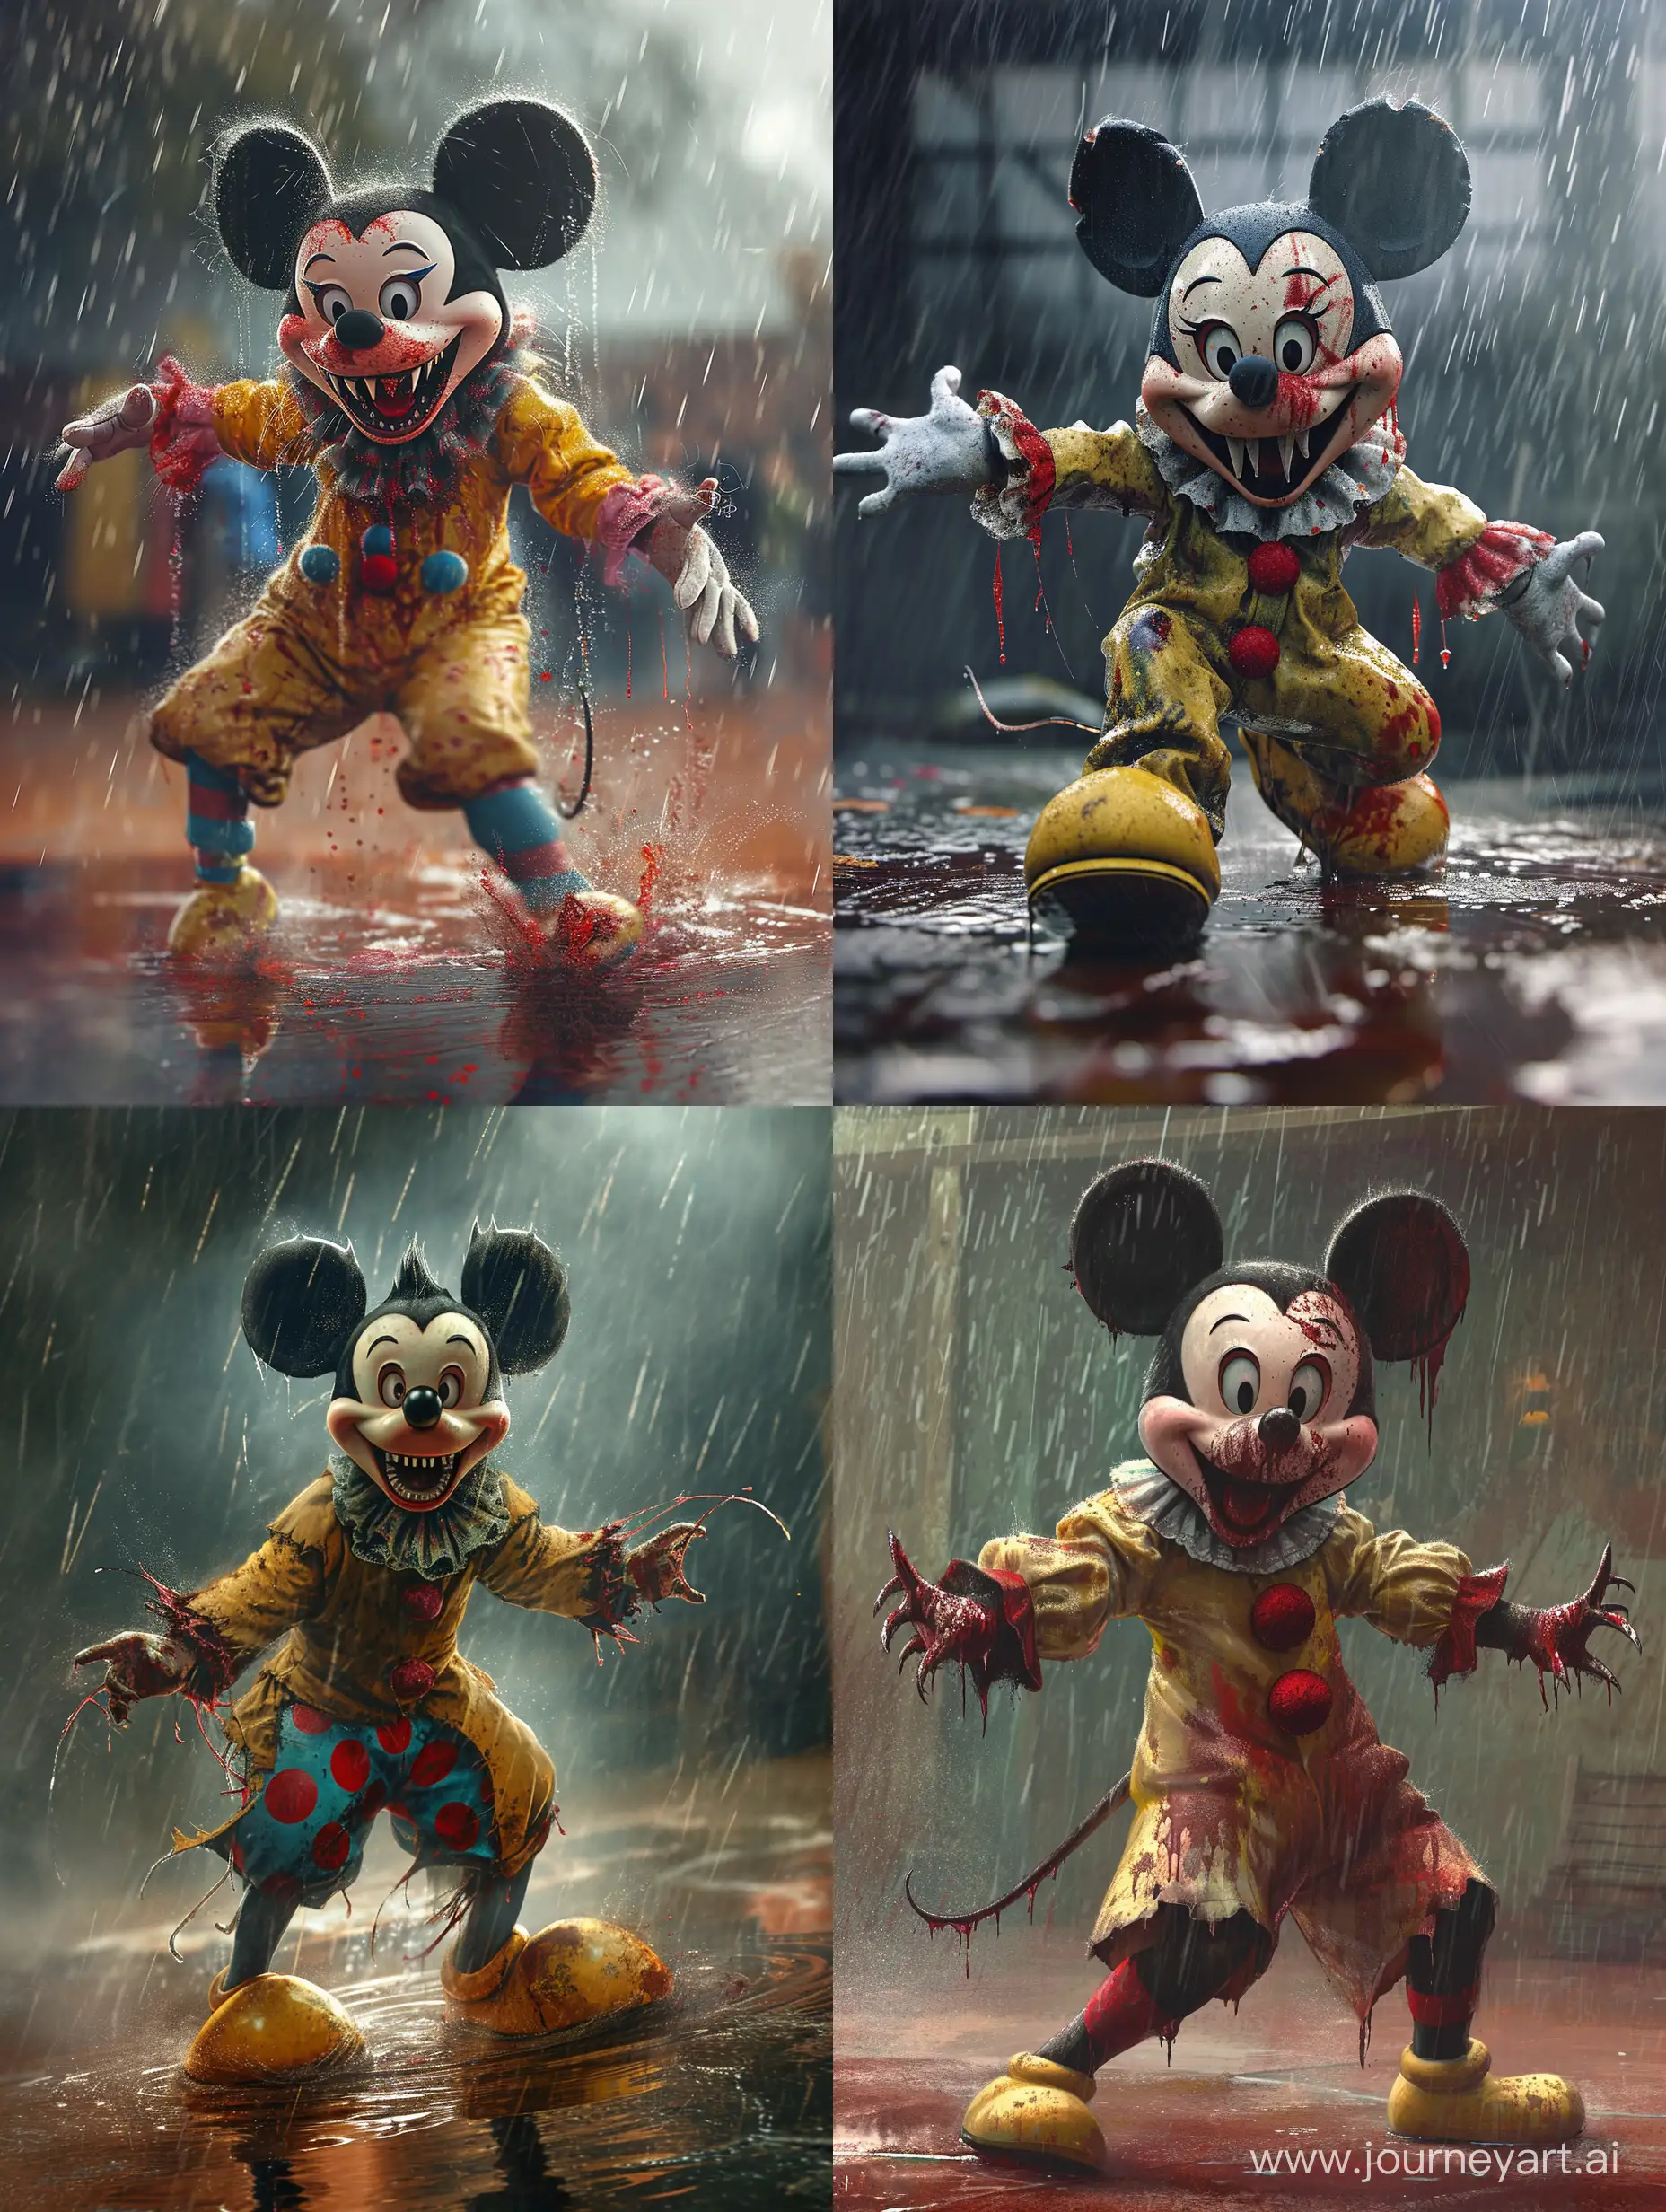 terrifying Mickey Mouse in a clown outfit dancing in the rain, sharp teeth, very evil, very angry, bloodstained outfit, digital paint style